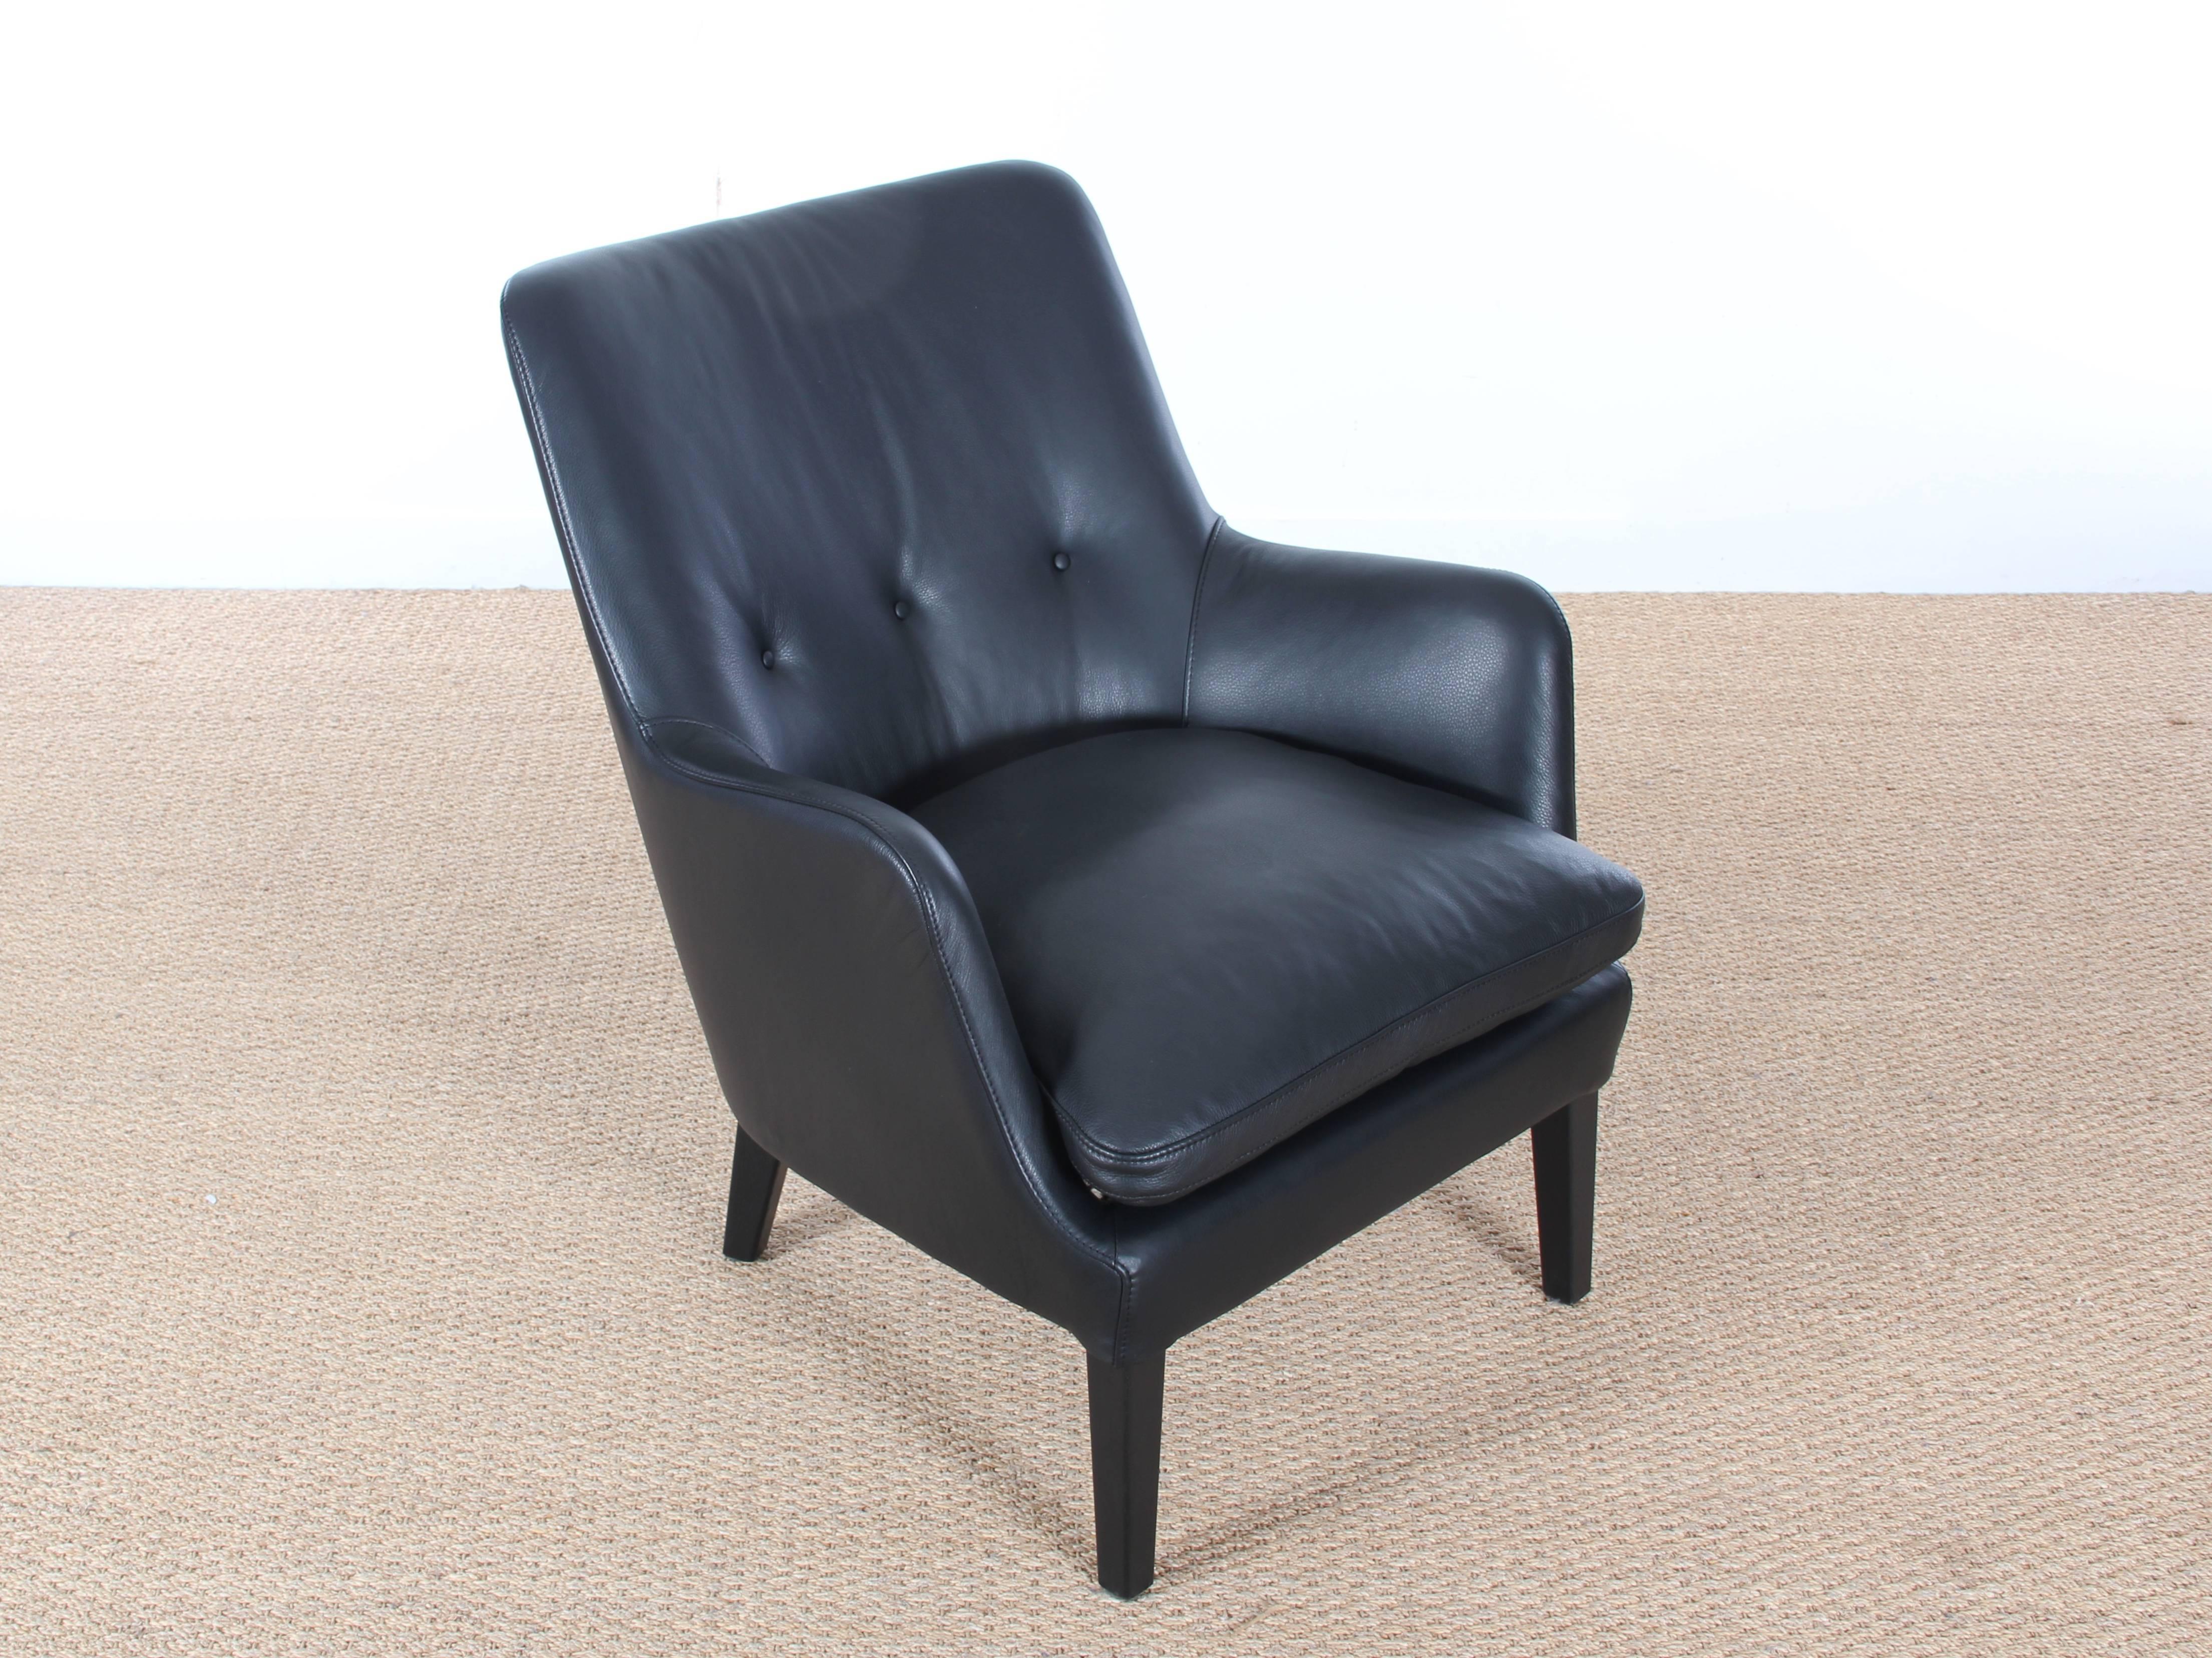 Mid-Century Modern Scandinavian Lounge Chair by Arne Vodder AV 53 New Release In New Condition For Sale In Courbevoie, FR